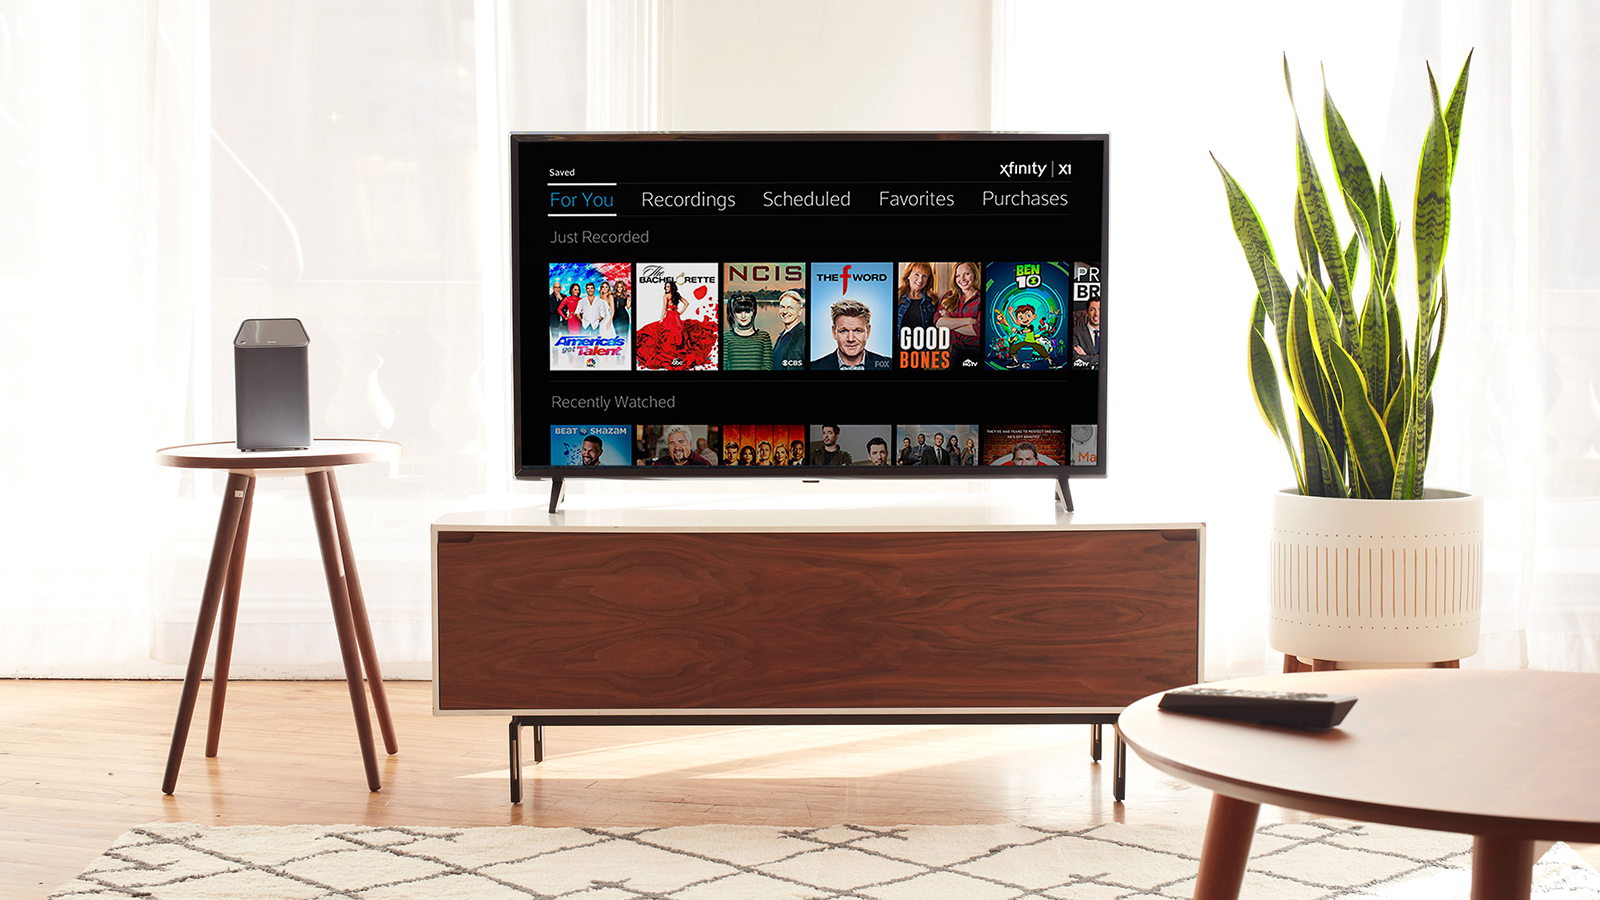 Comcast Launching Free Xfinity Movie Week for Florida Customers